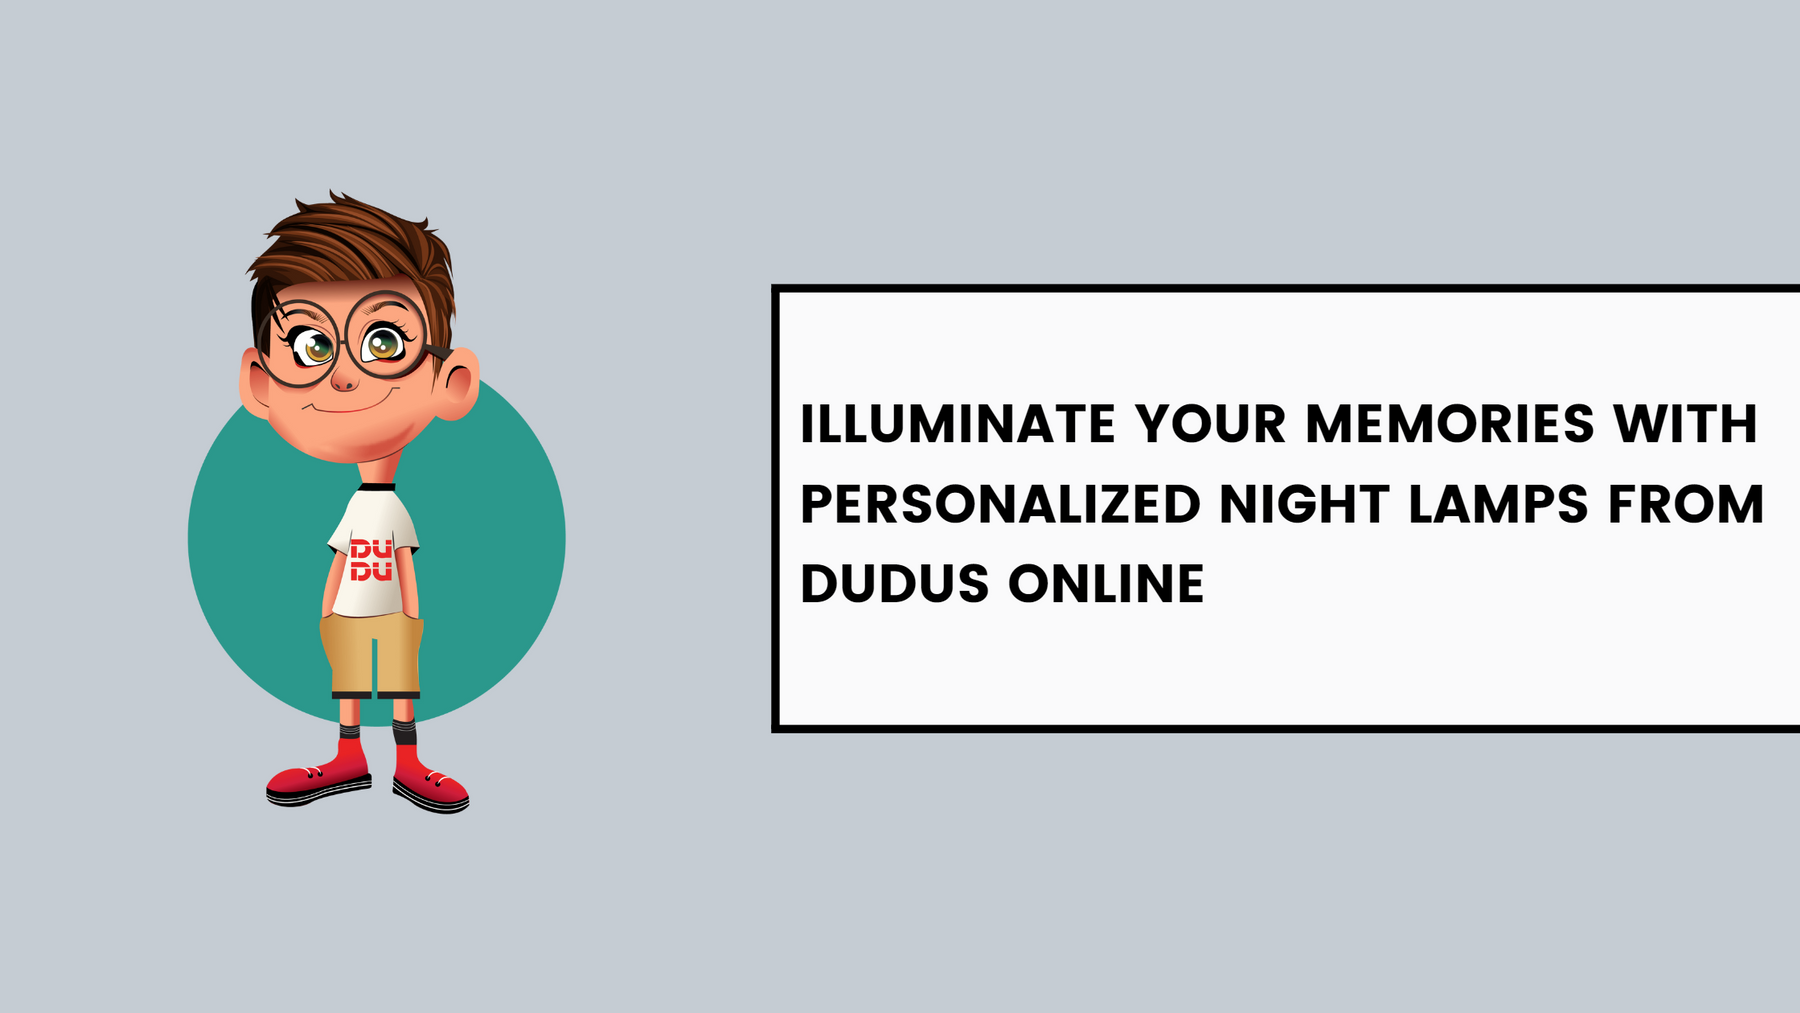 Illuminate Your Memories with Personalized Night Lamps from Dudus Online